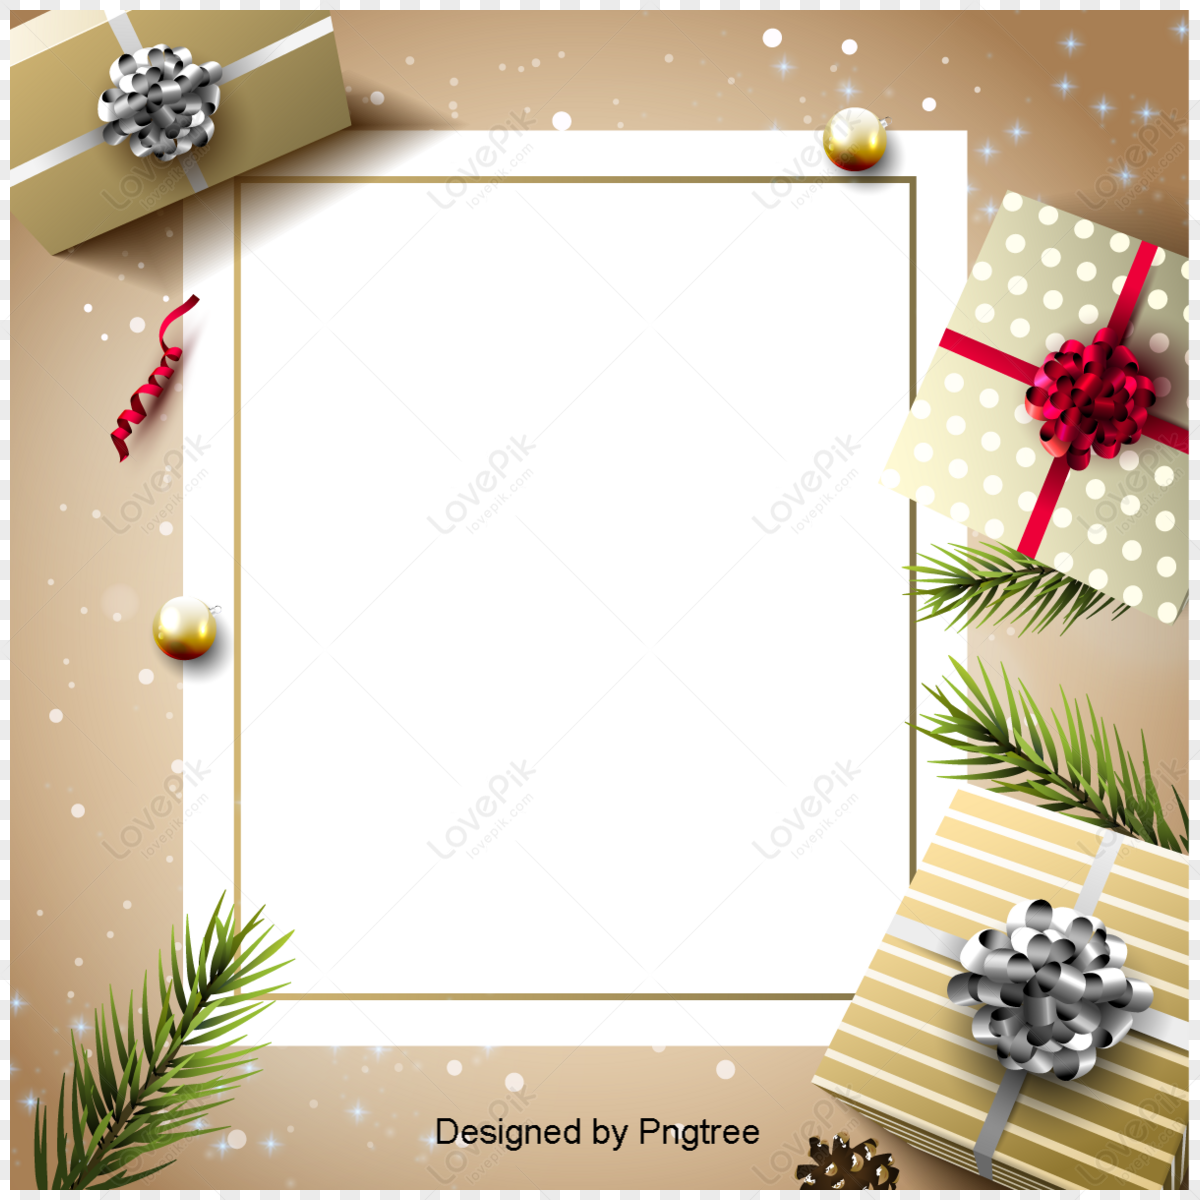 Gift card Business Christmas gift, gift transparent background PNG clipart